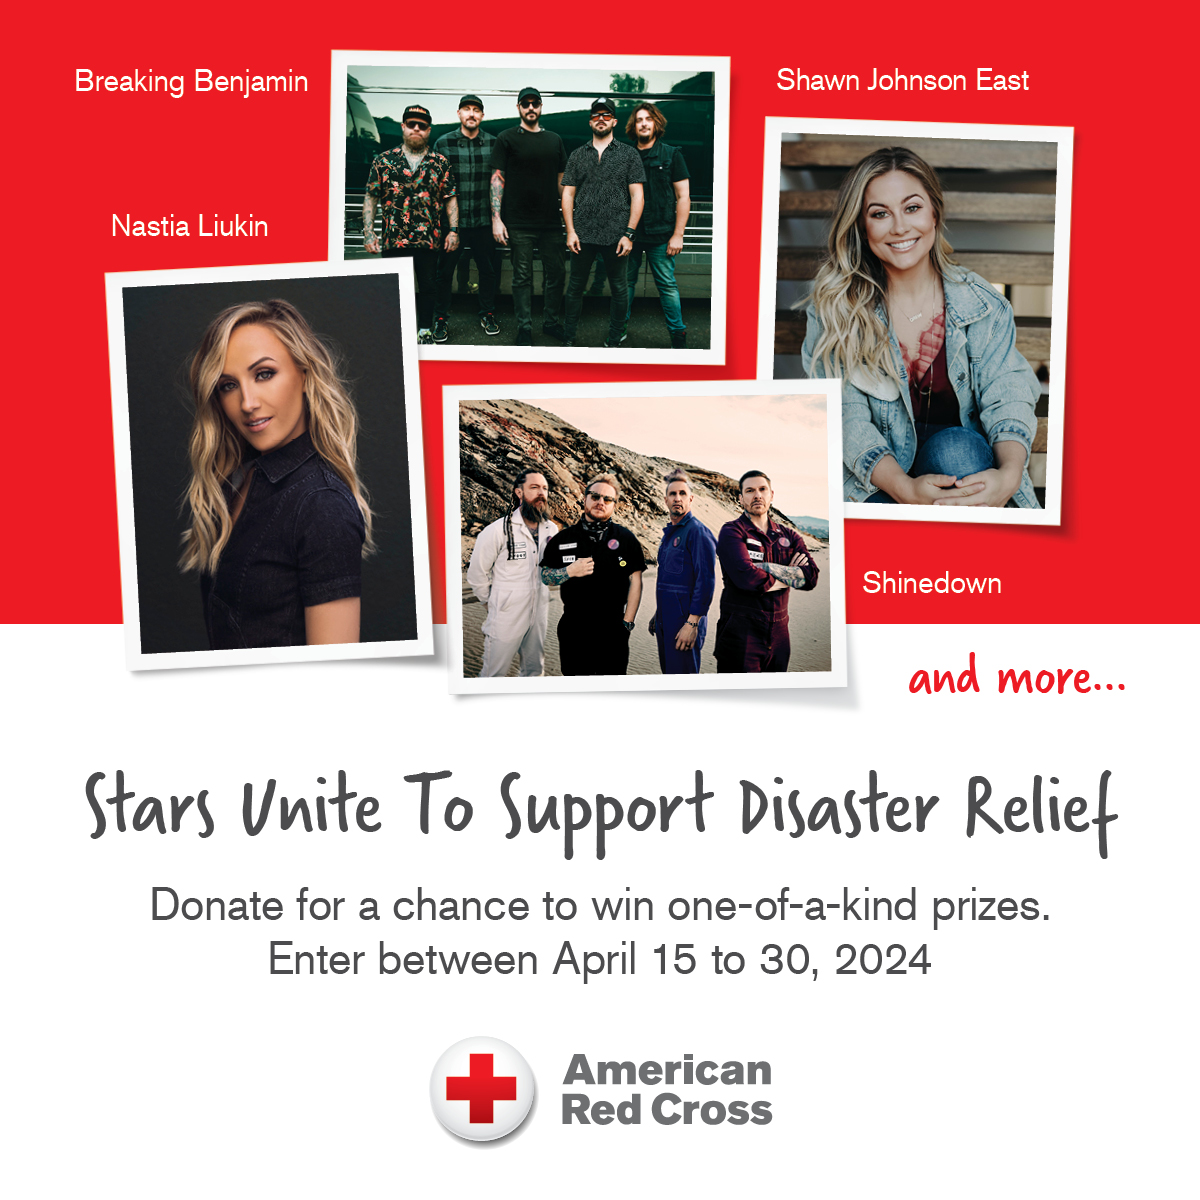 From now until April 30th, you can help donate to support our disaster relief efforts and enter to win unique prizes! Autograph guitars and a thank you note from your favorite music star. The Red Cross responds to more than 60,000 disasters each year now is the time to prepare.